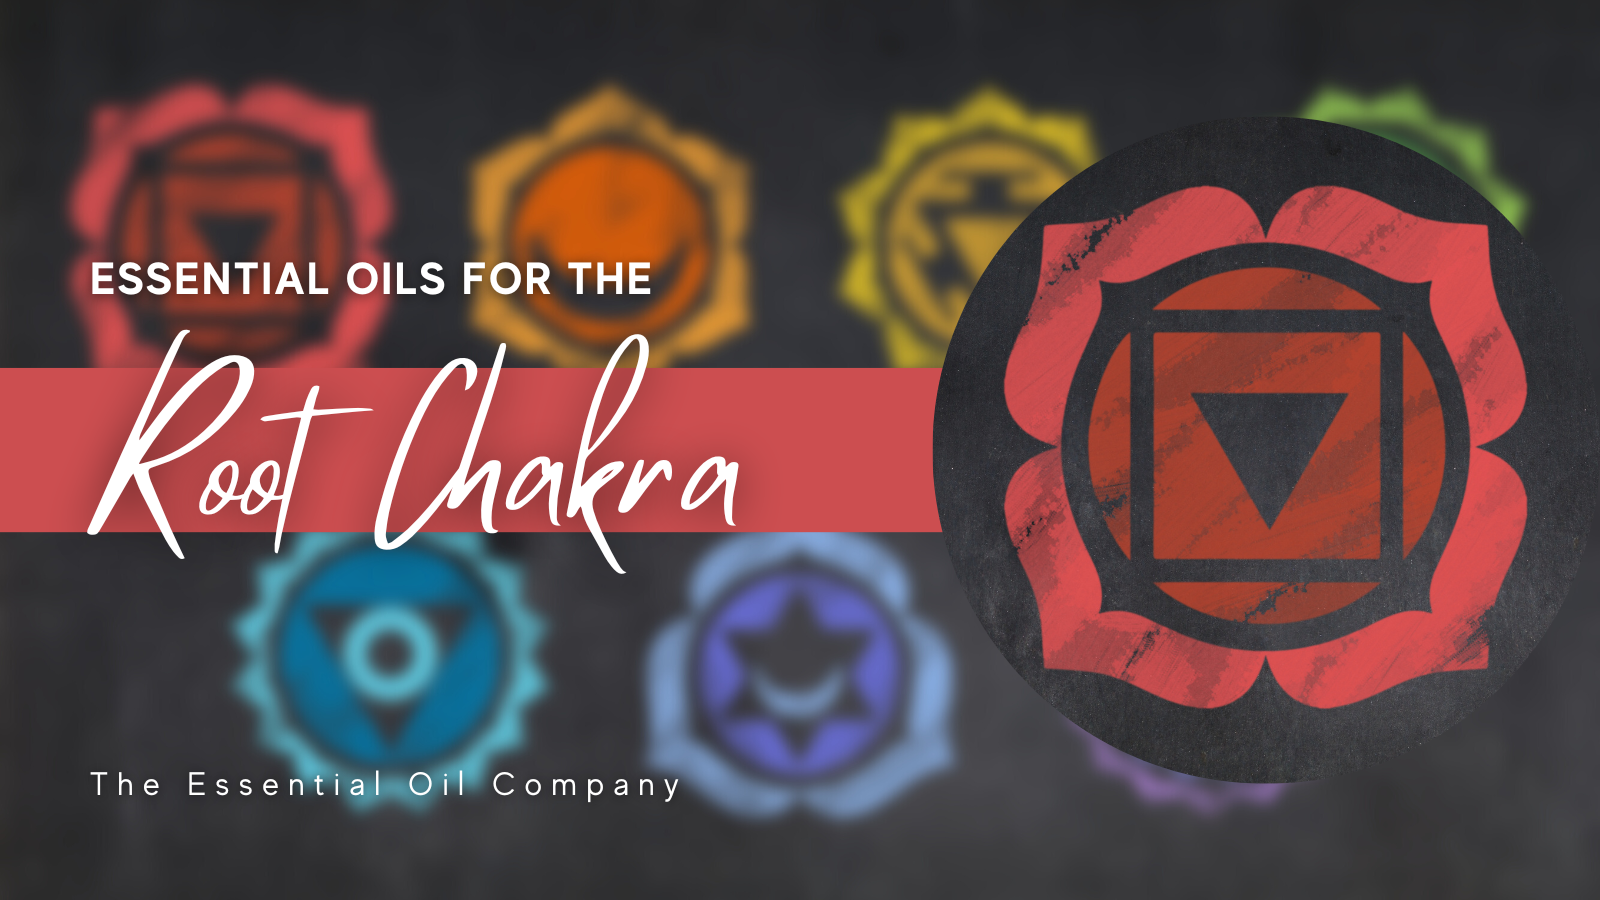 Essential Oils for the Root Chakra